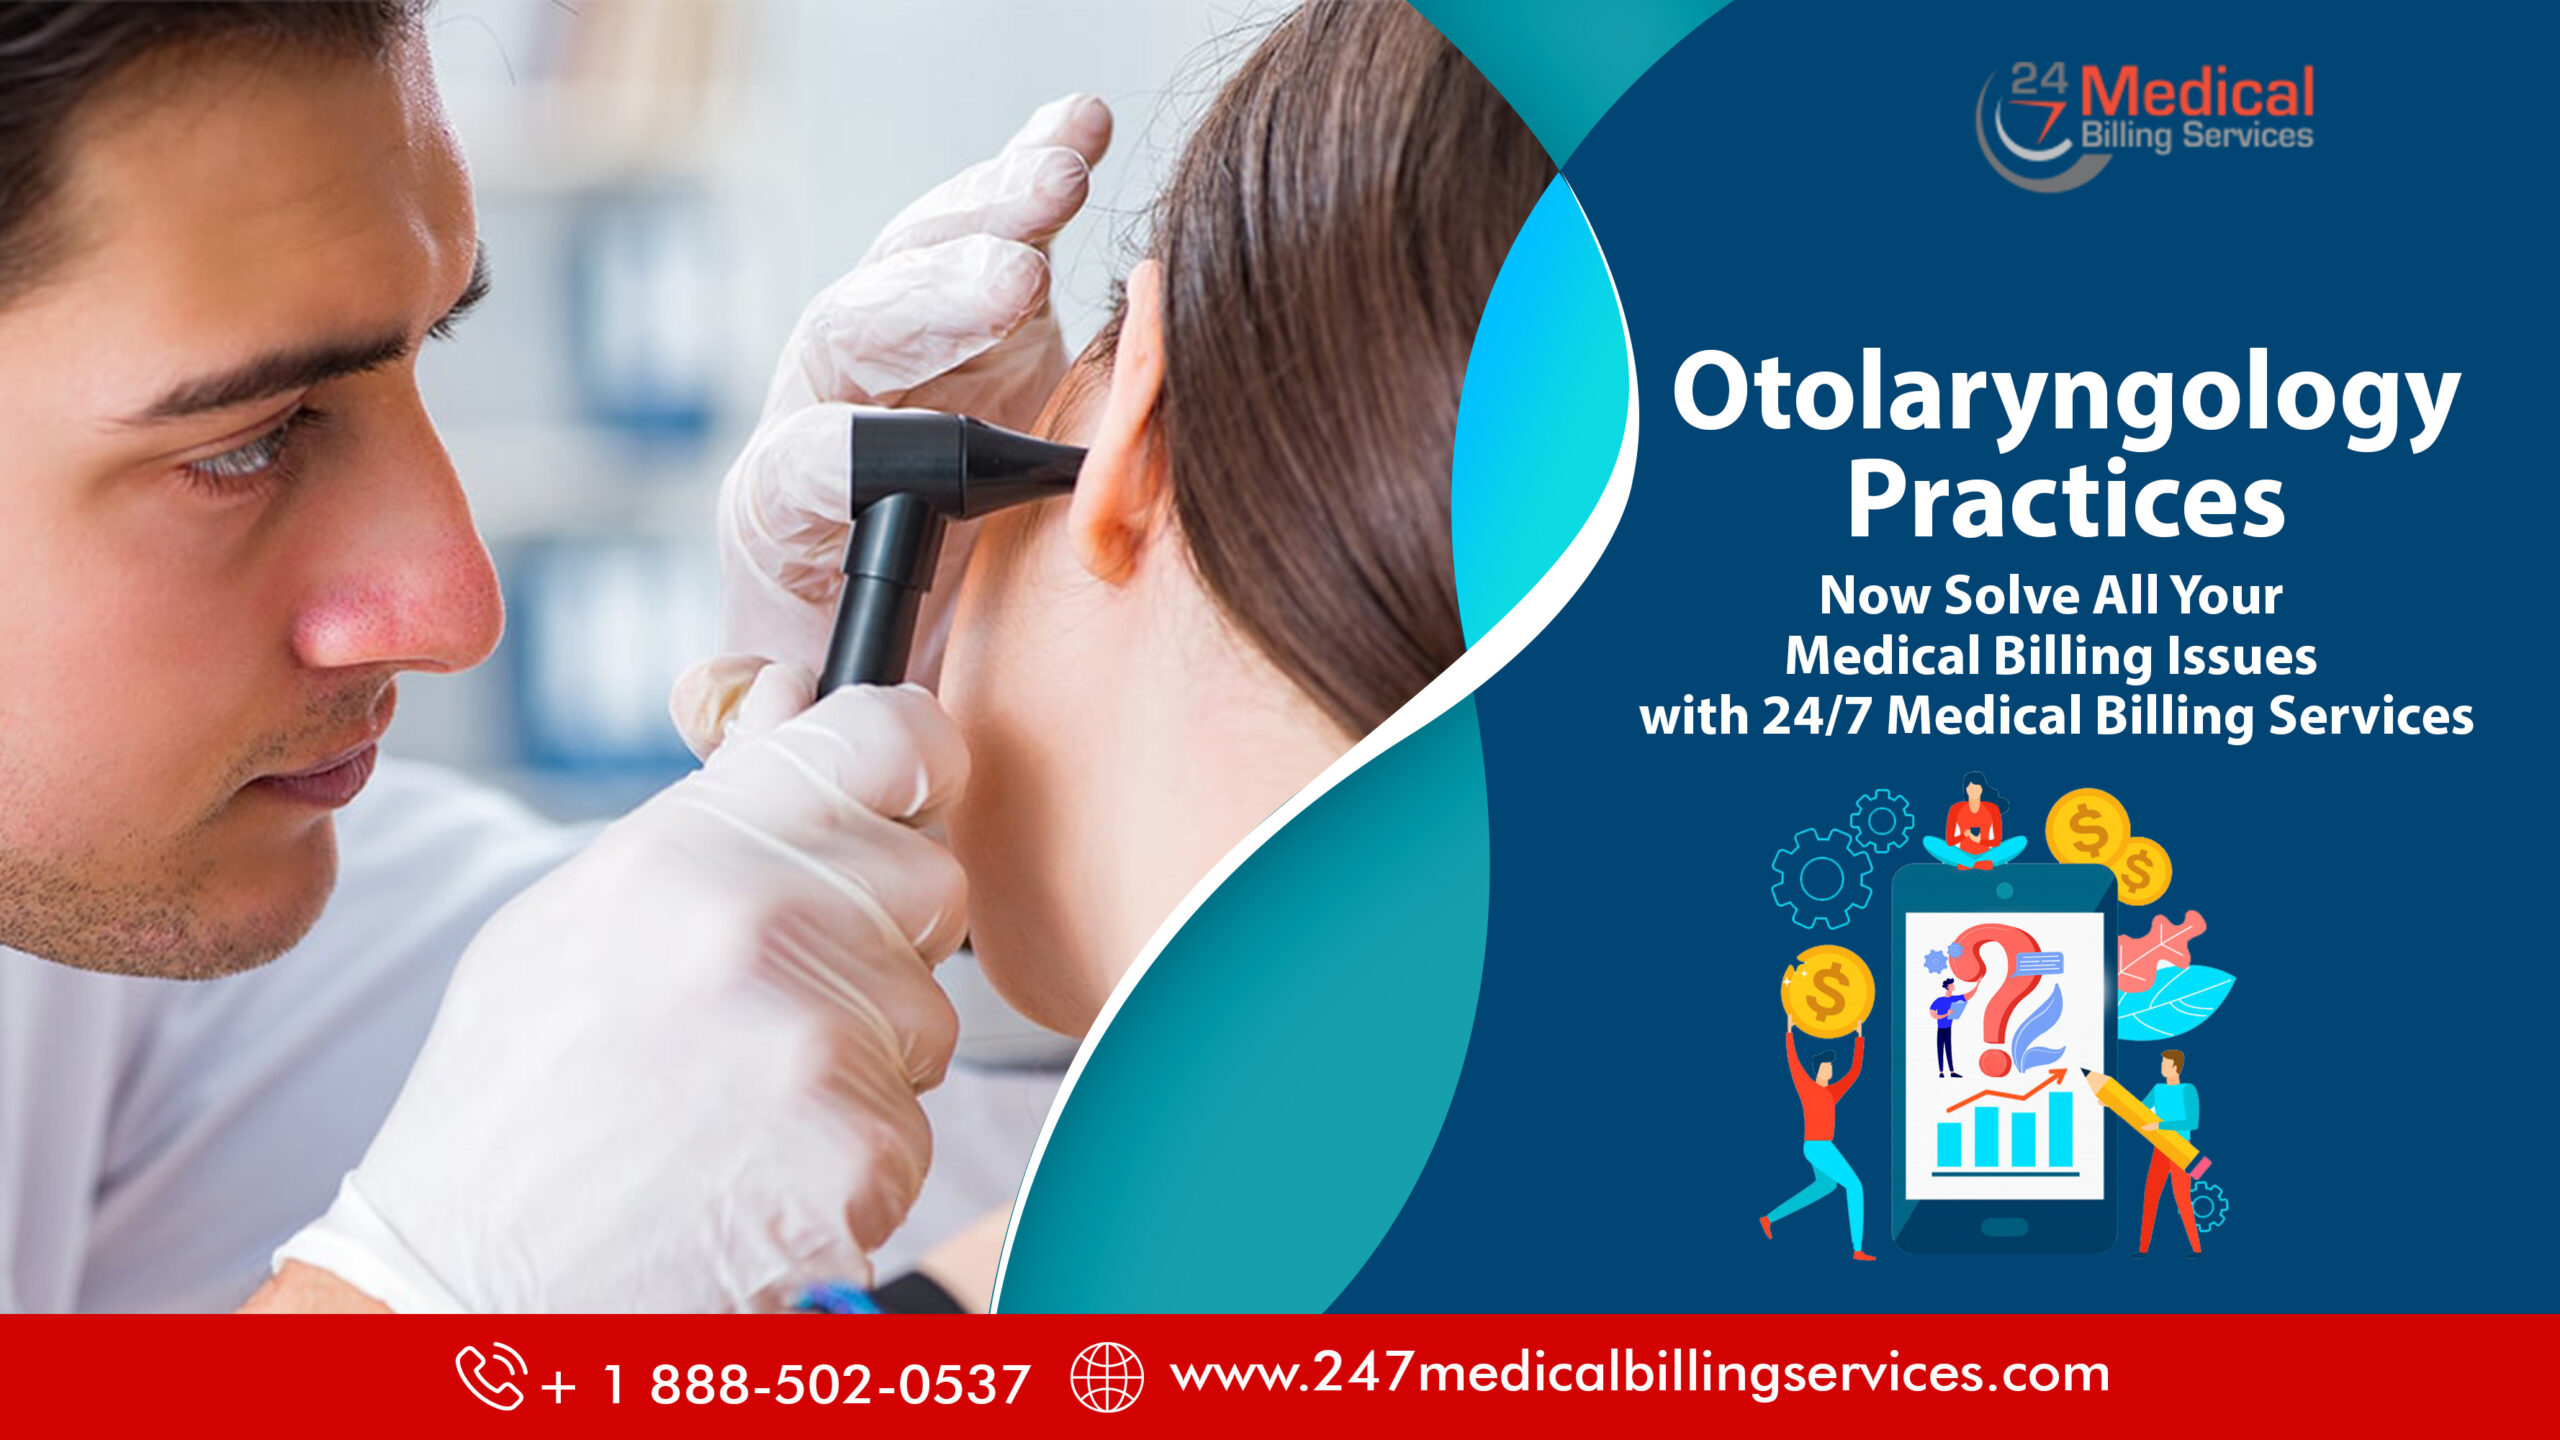  Otolaryngology Practices- Now Solve All Your Medical Billing Issues with 24/7 Medical Billing Services